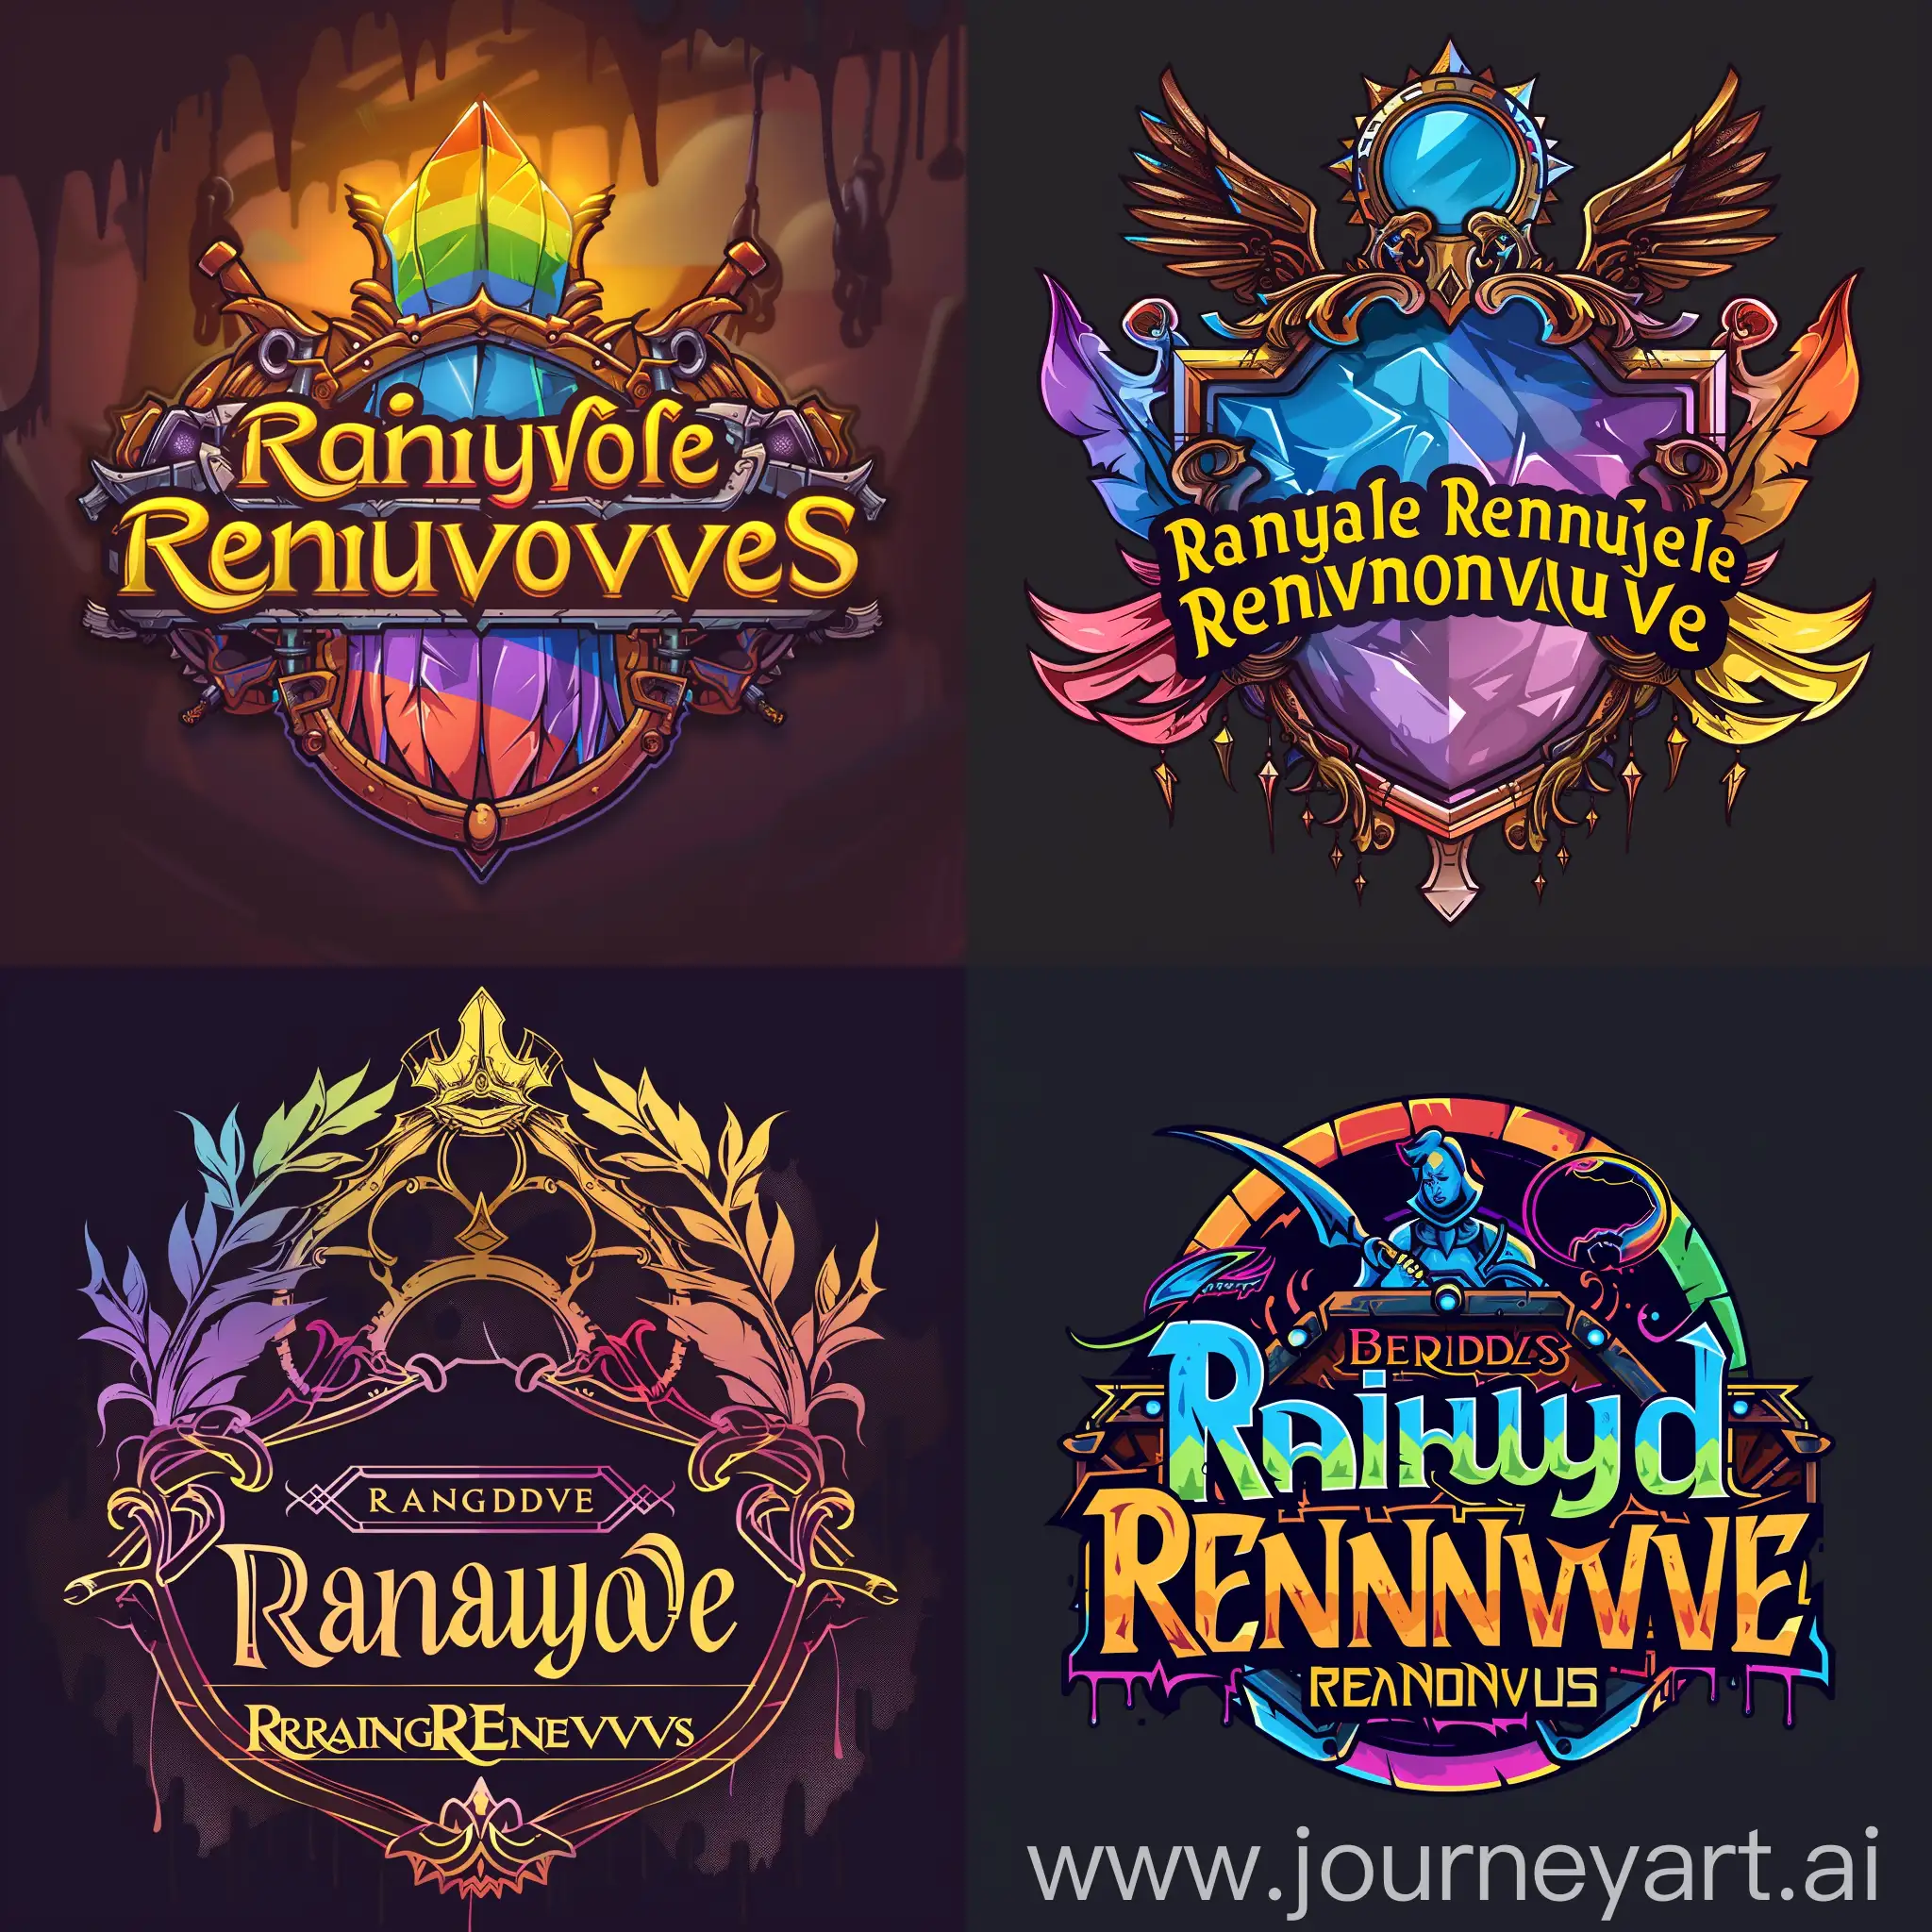 A Discord Logo of our new formed WoW Guild called "Rainbow Rendezvous"